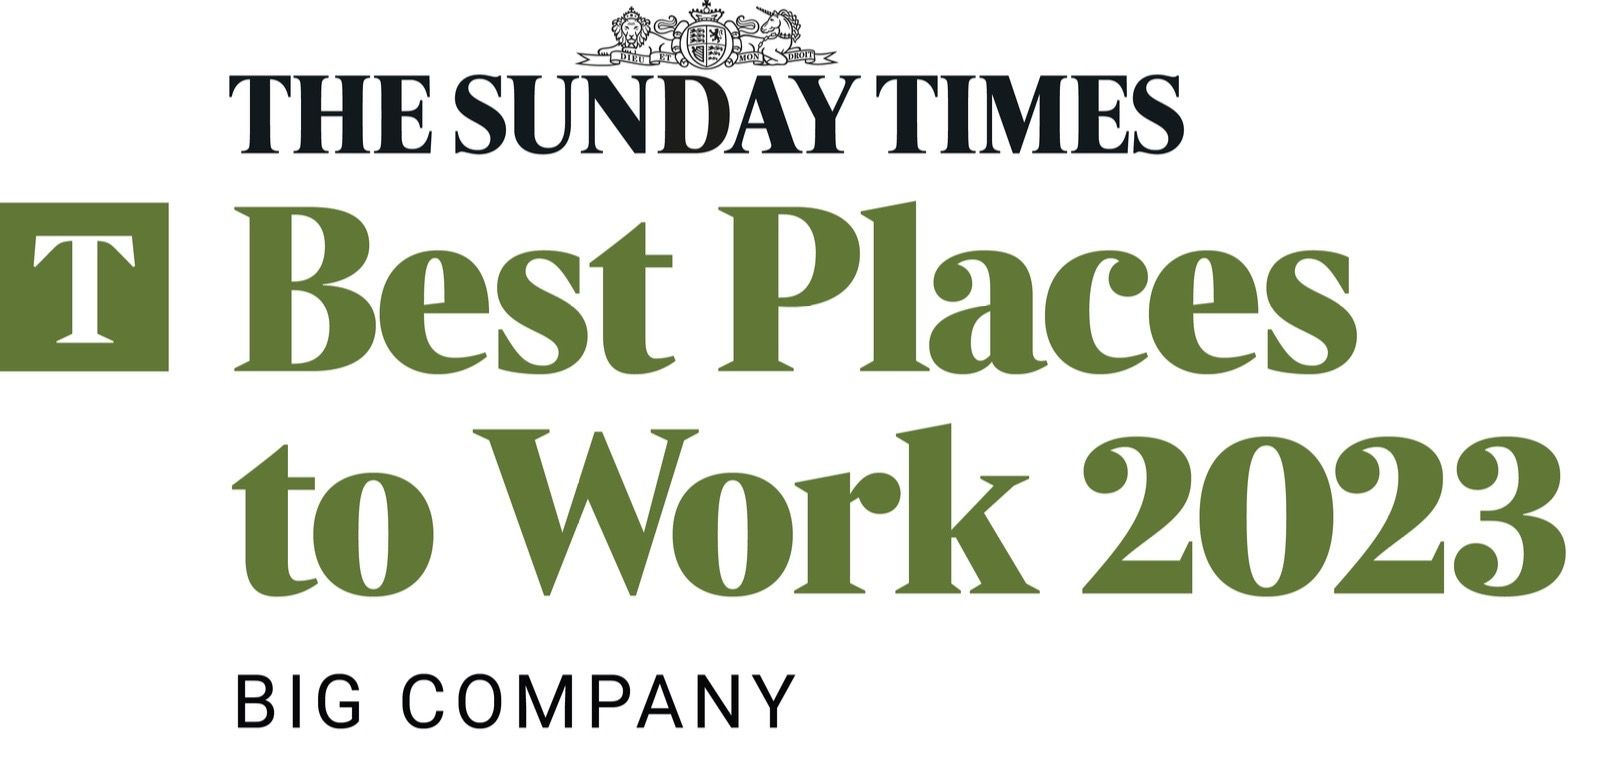 The Sunday Times Best Places to Work Awards